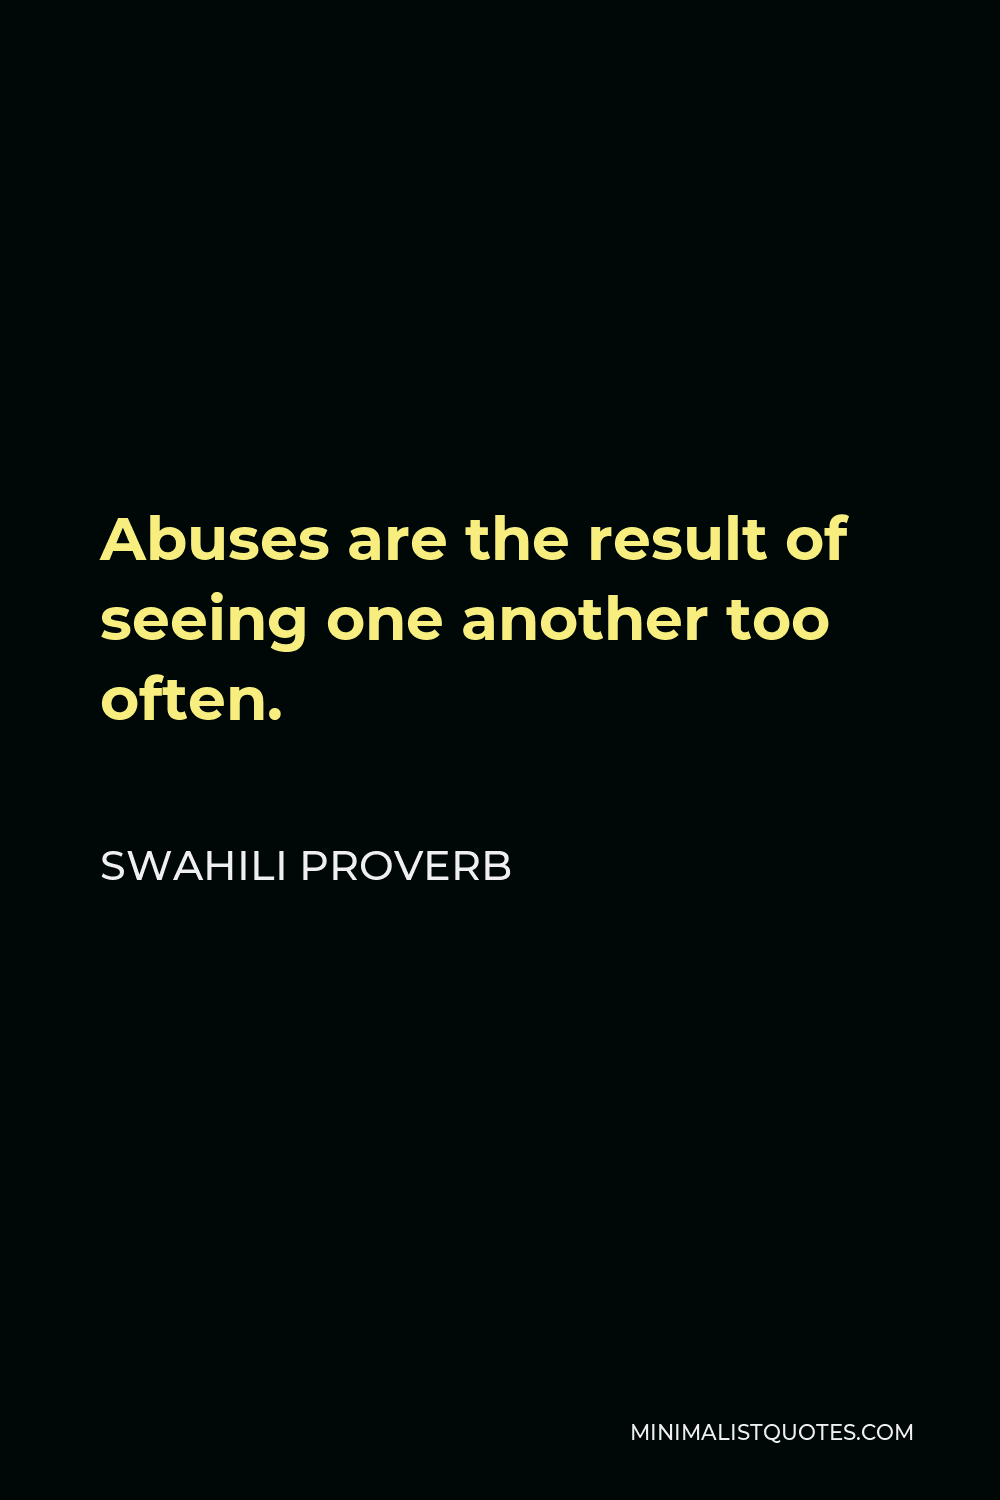 Swahili Proverb Quote - Abuses are the result of seeing one another too often.